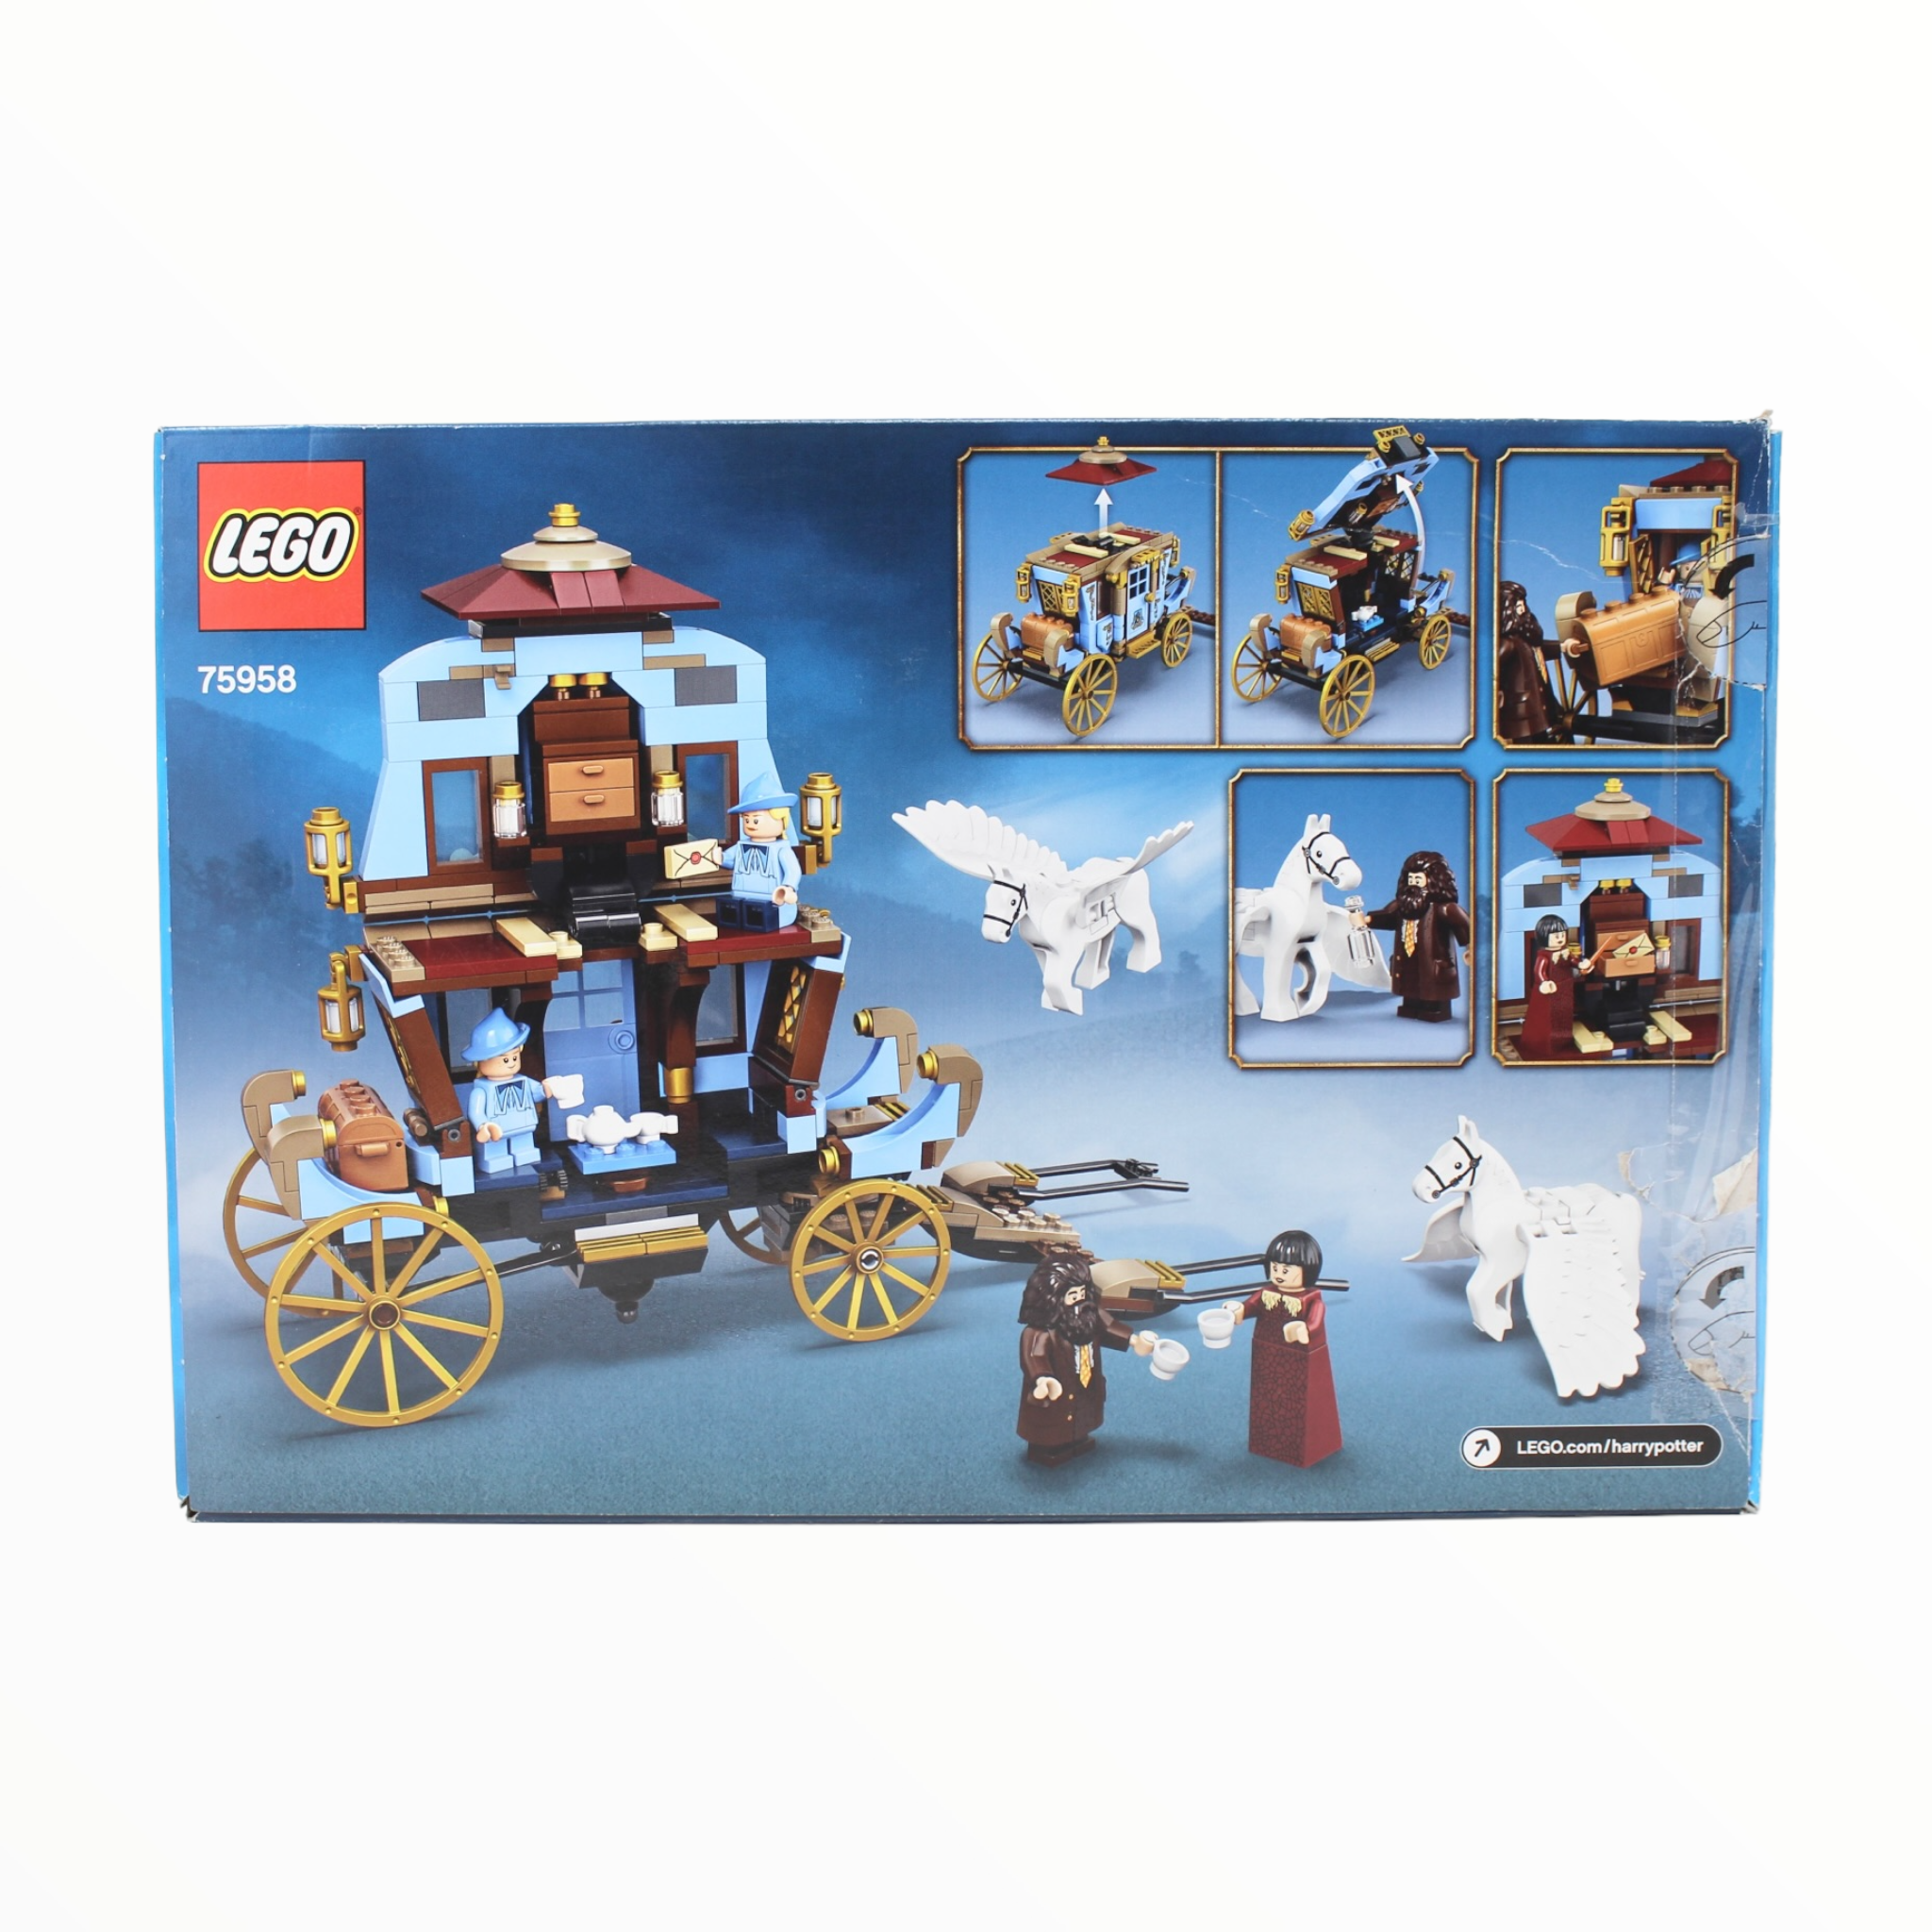 Certified Used Set 75958 Harry Potter Beauxbatons Carriage Arrival at Hogwarts